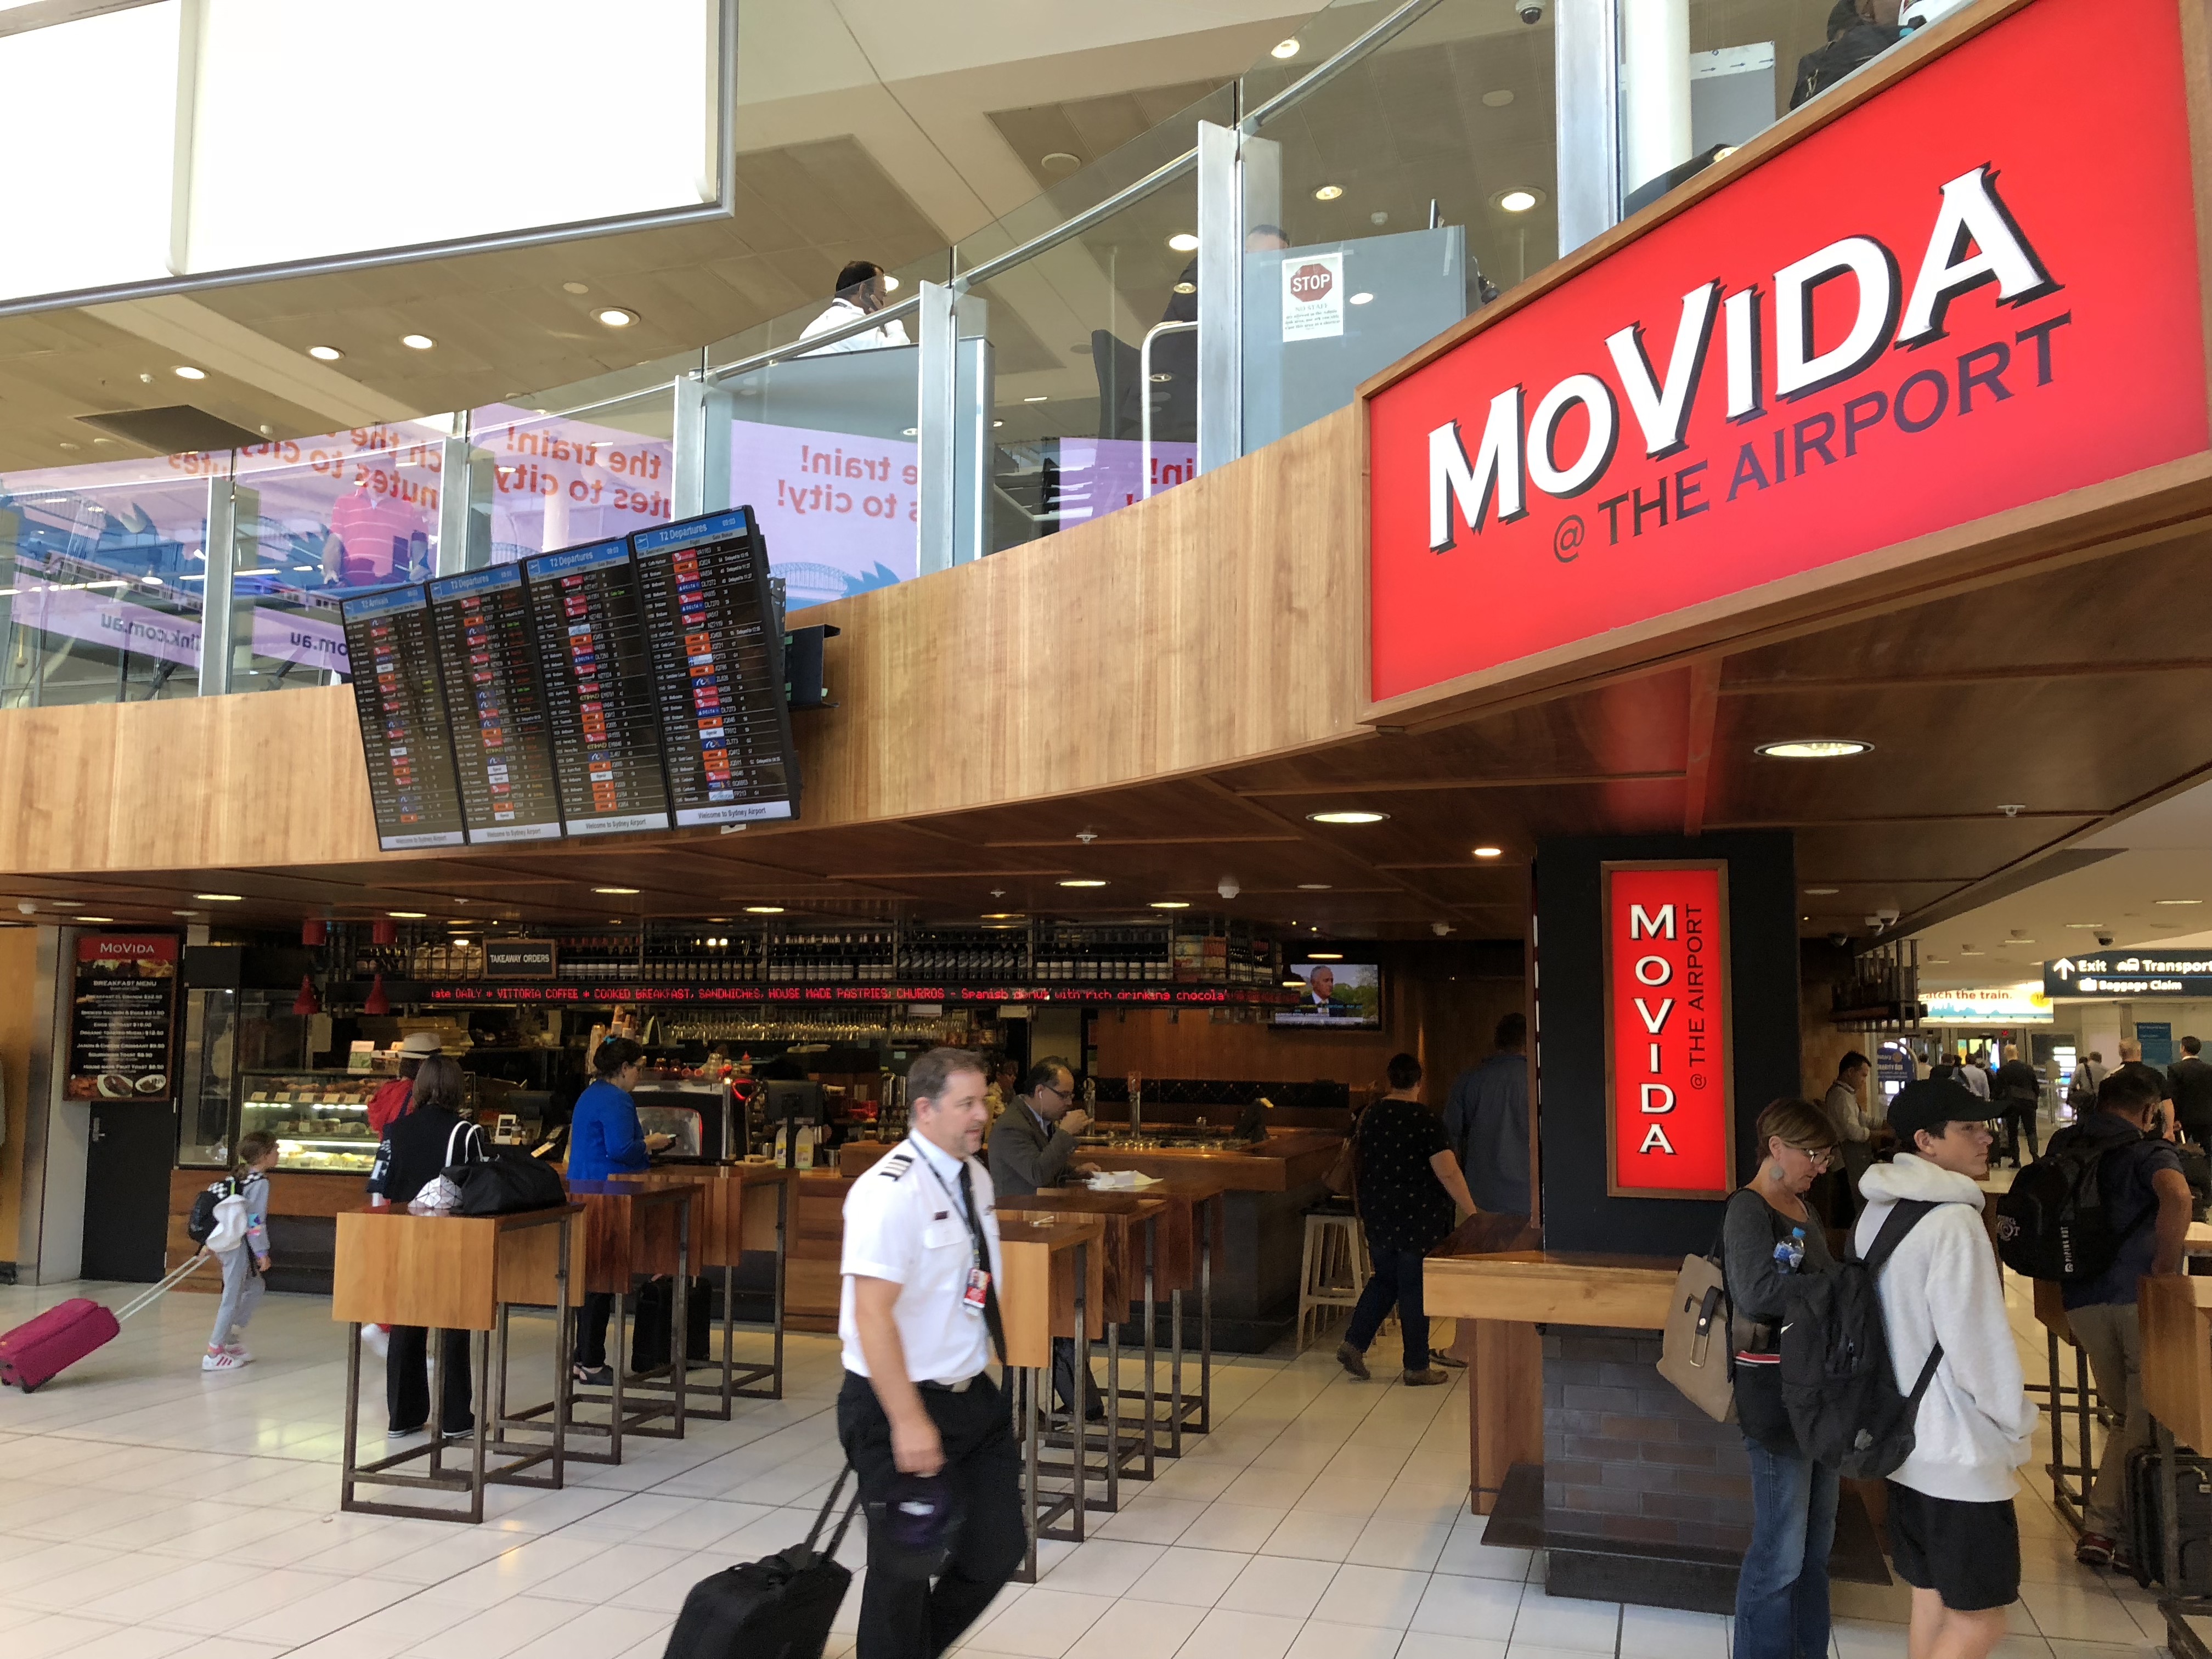 Shopping at Sydney Airport Domestic Terminals